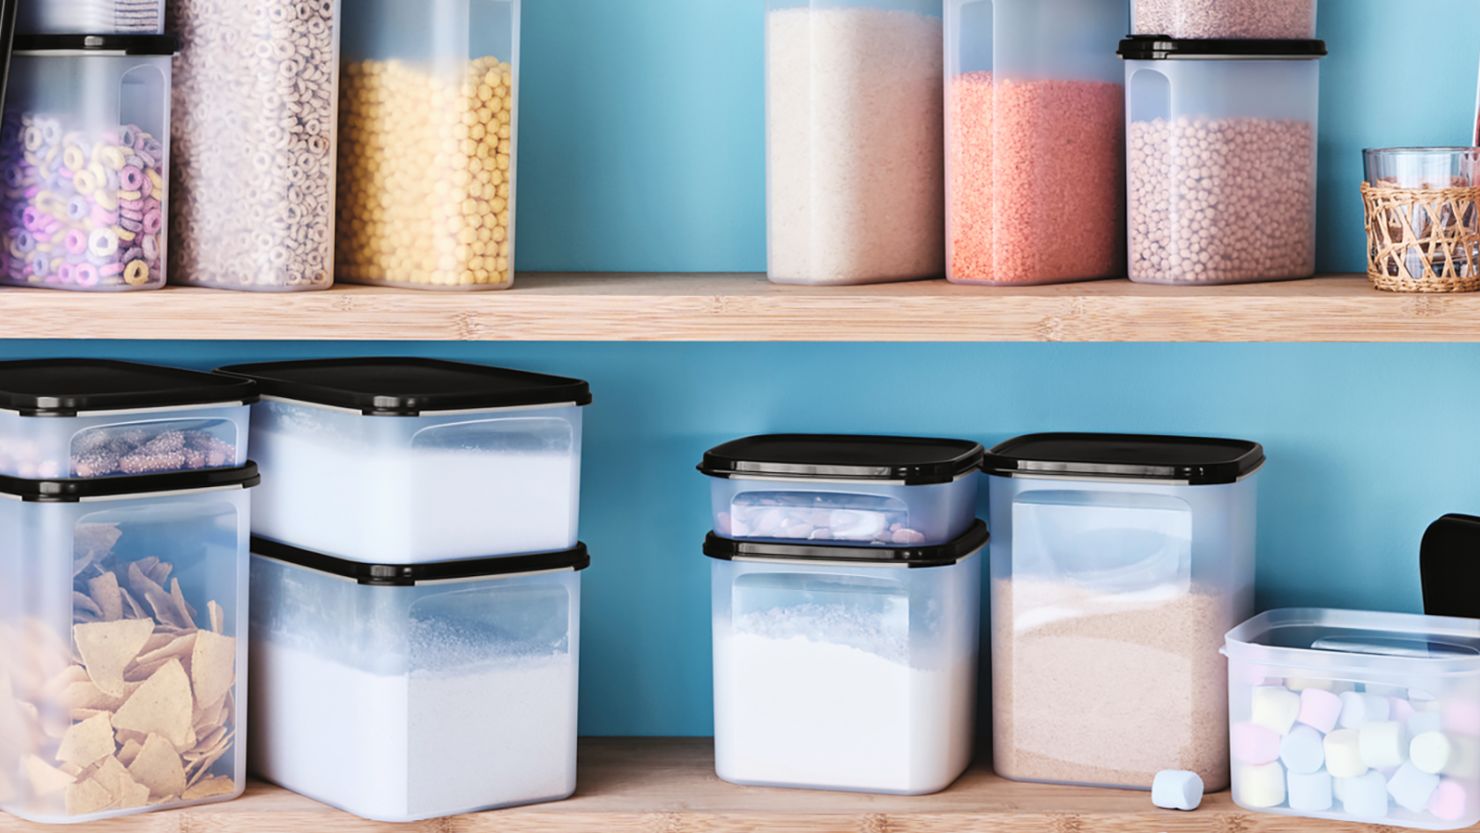 Tupperware may have a second lease on life.